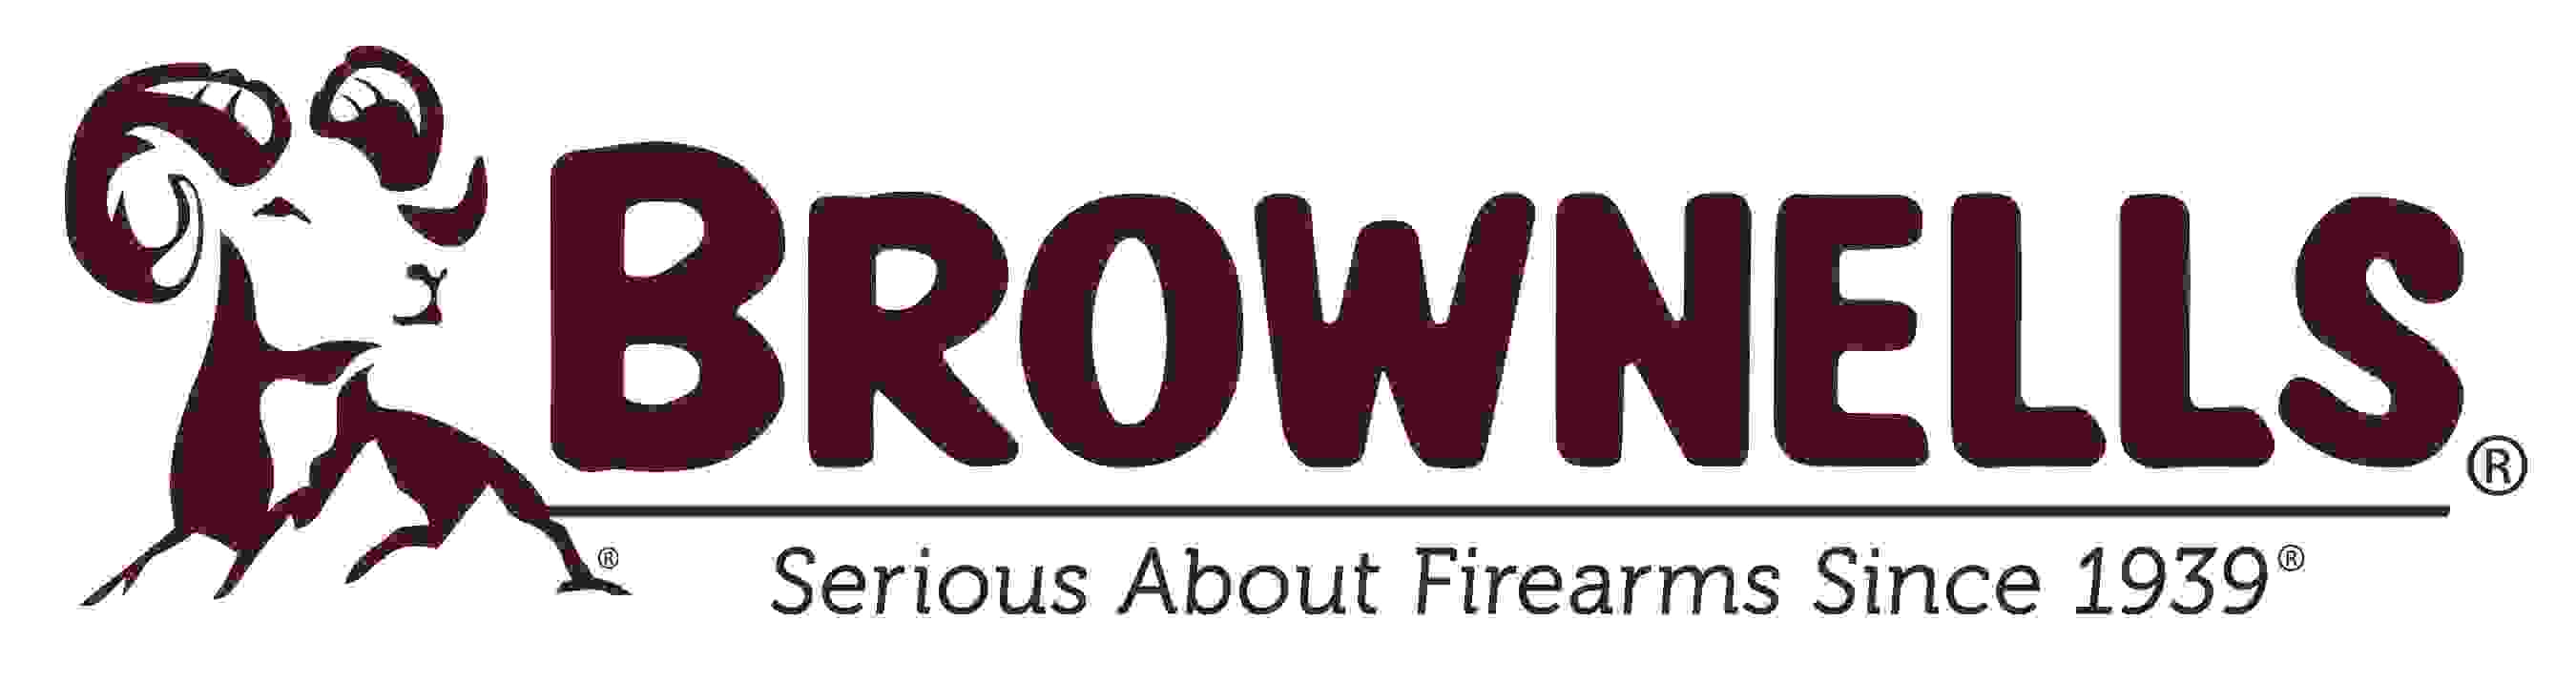 BROWNELLS Products